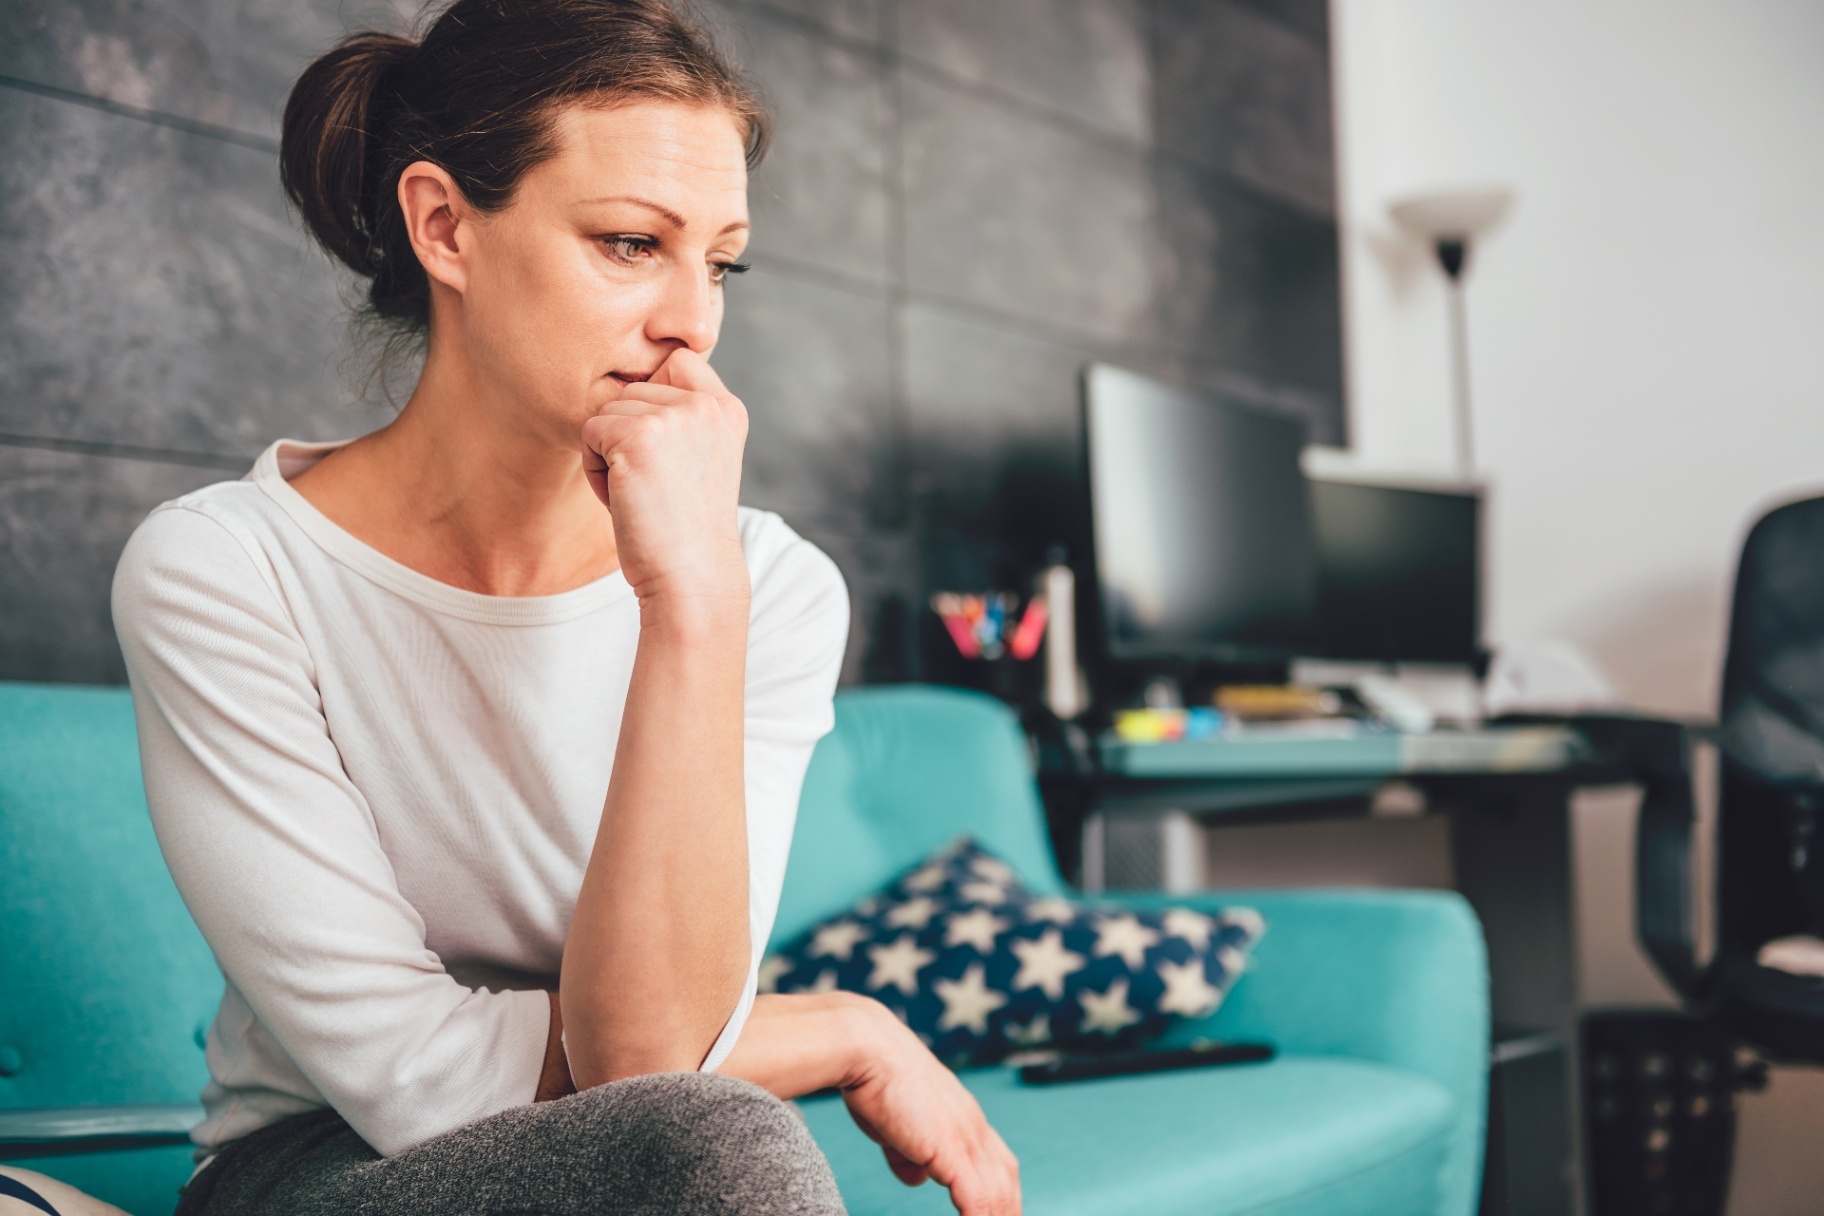 A woman sits with a concerned expression as she stares off into the distance. Learn how an anxiety therapist in Palm Beach County, FL can offer support with online anxiety treatment in Delray Beach, FL from the comfort of home. Or, search "anxiety therapy near me" today to learn more!